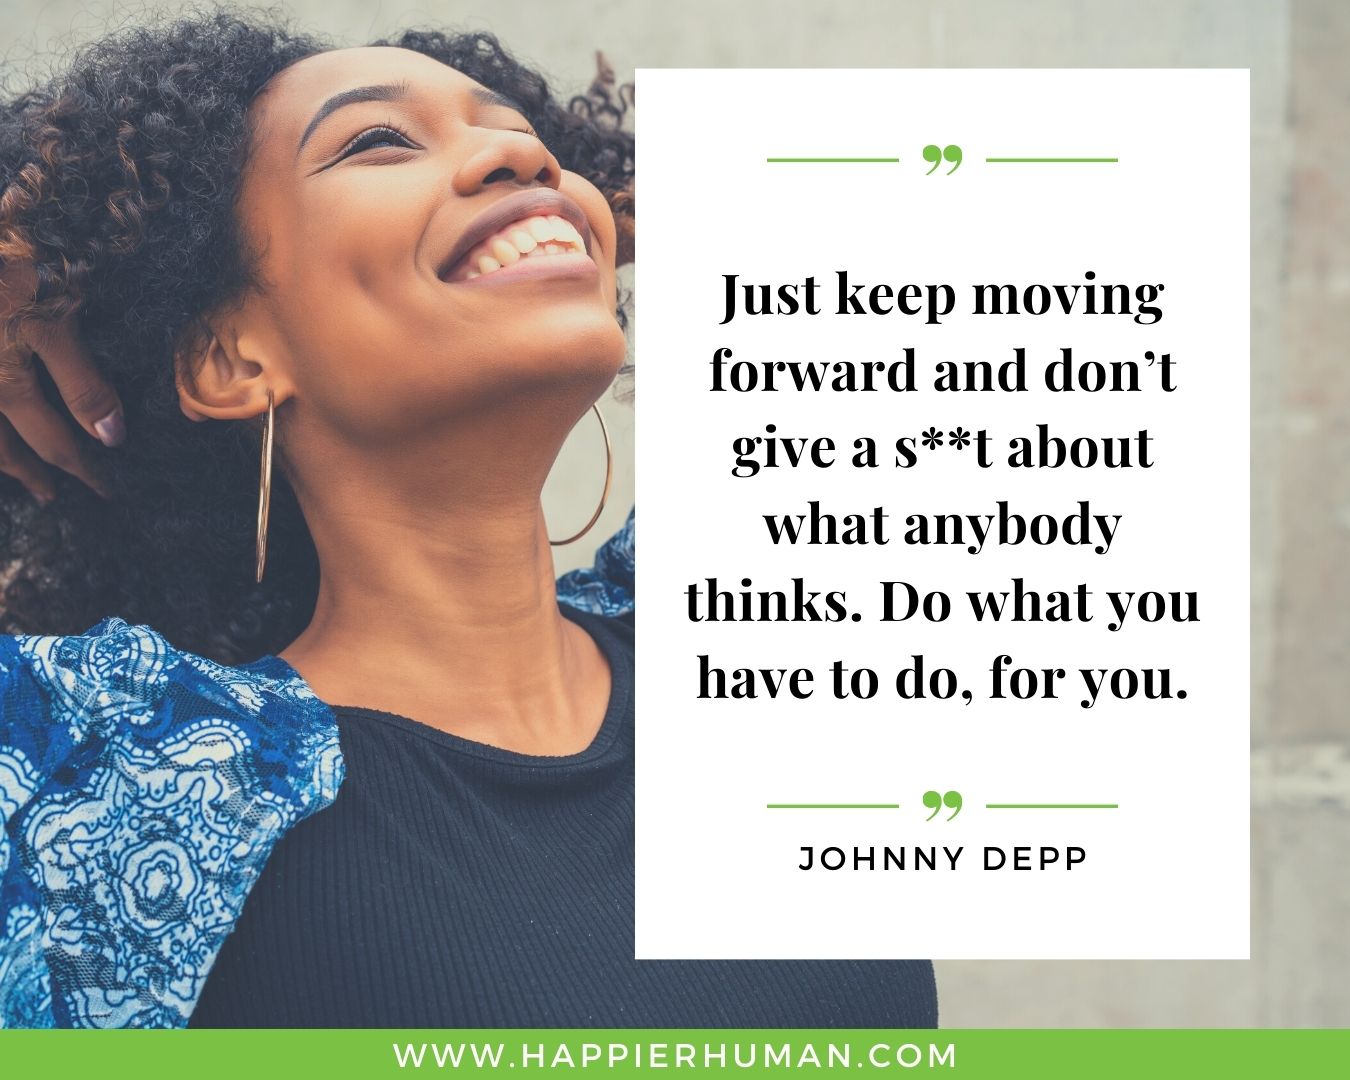 Haters Quotes - “Just keep moving forward and don’t give a s**t about what anybody thinks. Do what you have to do, for you.” - Johnny Depp